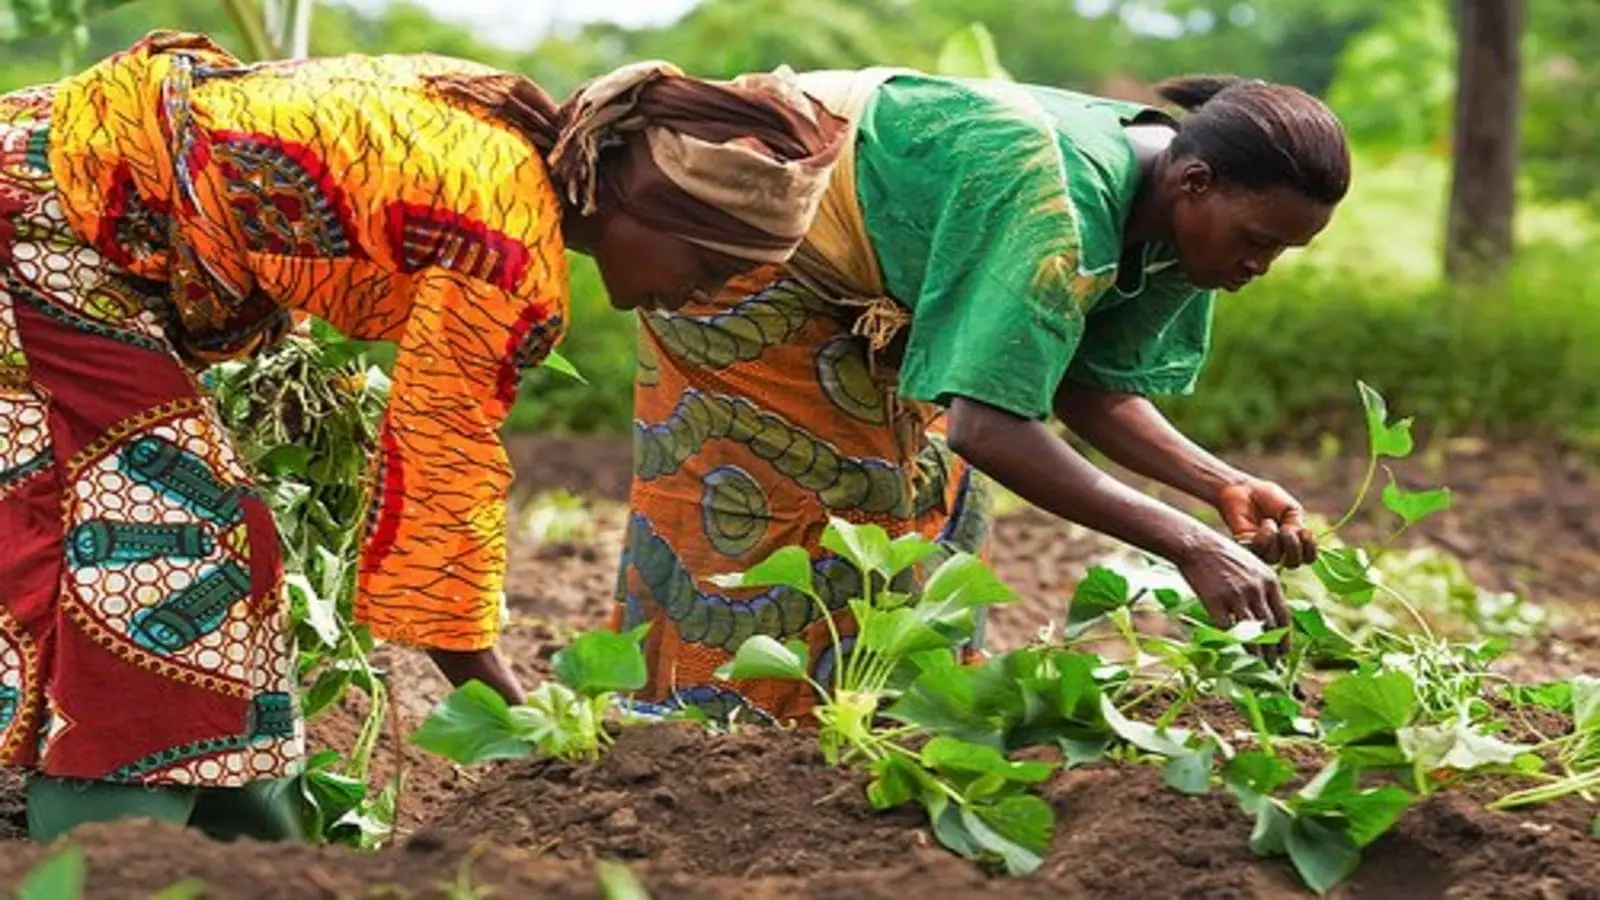 Food Security in Africa: Microsoft, OCP Africa pool efforts to support smallholder farmers